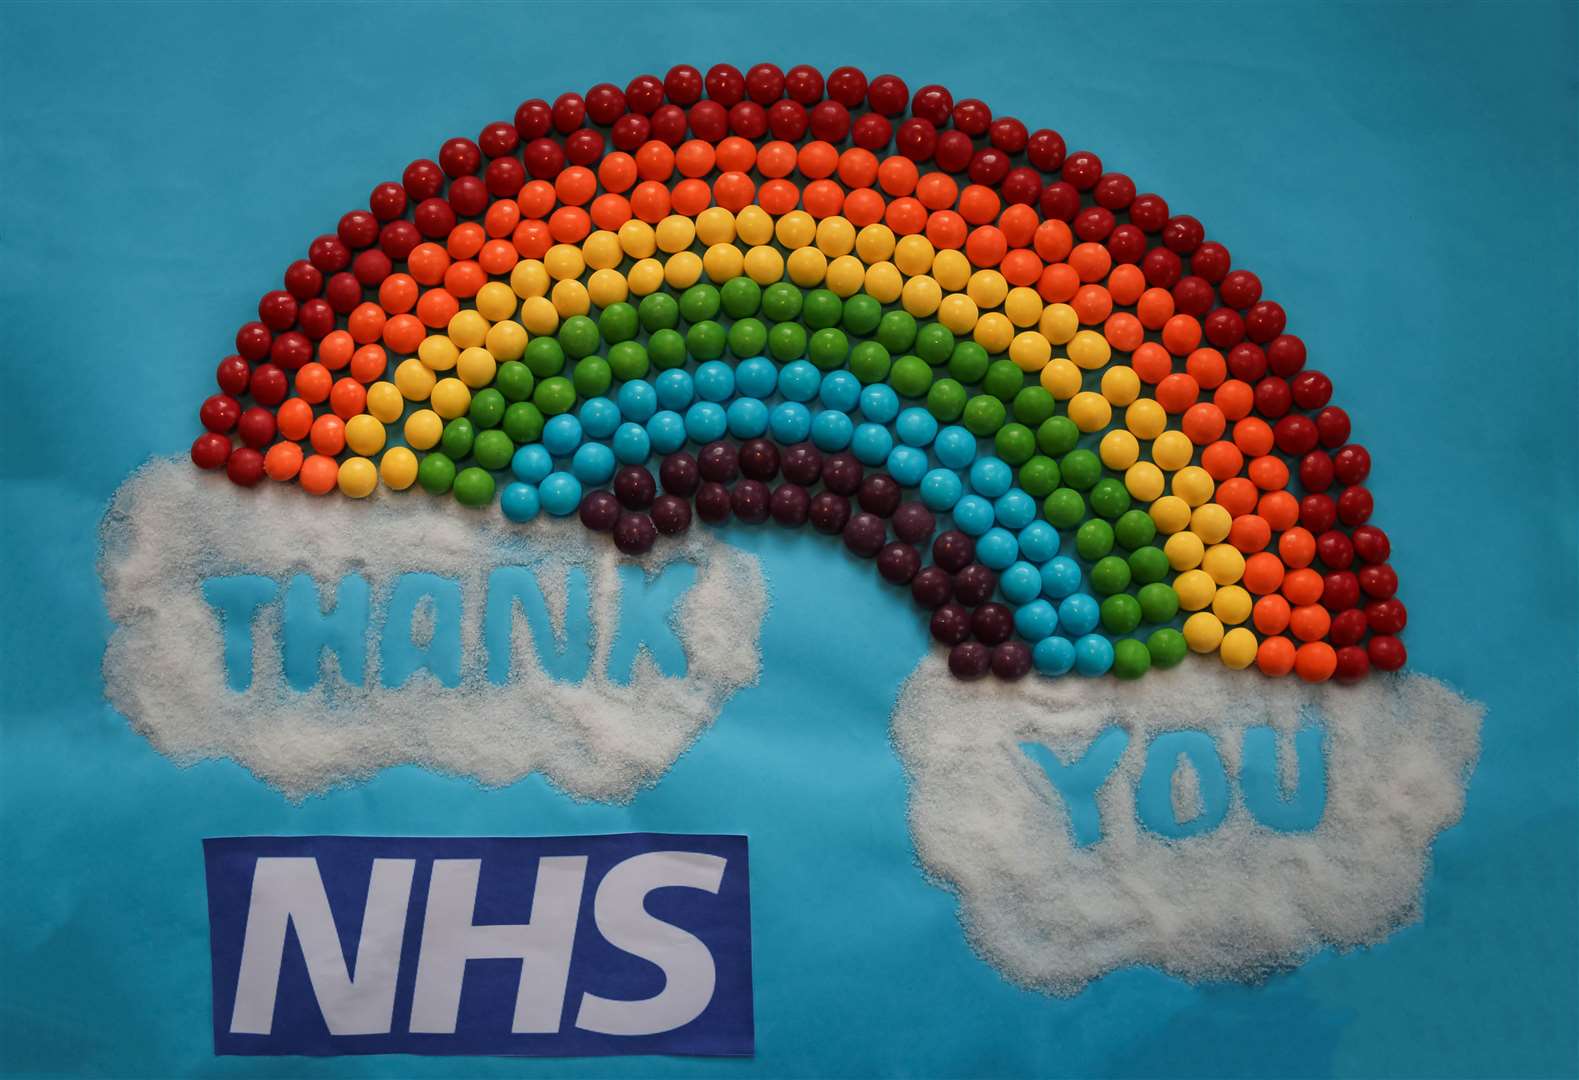 Real life superheroes, a sweet-based NHS tribute which earned top spot for Alex Henderson.